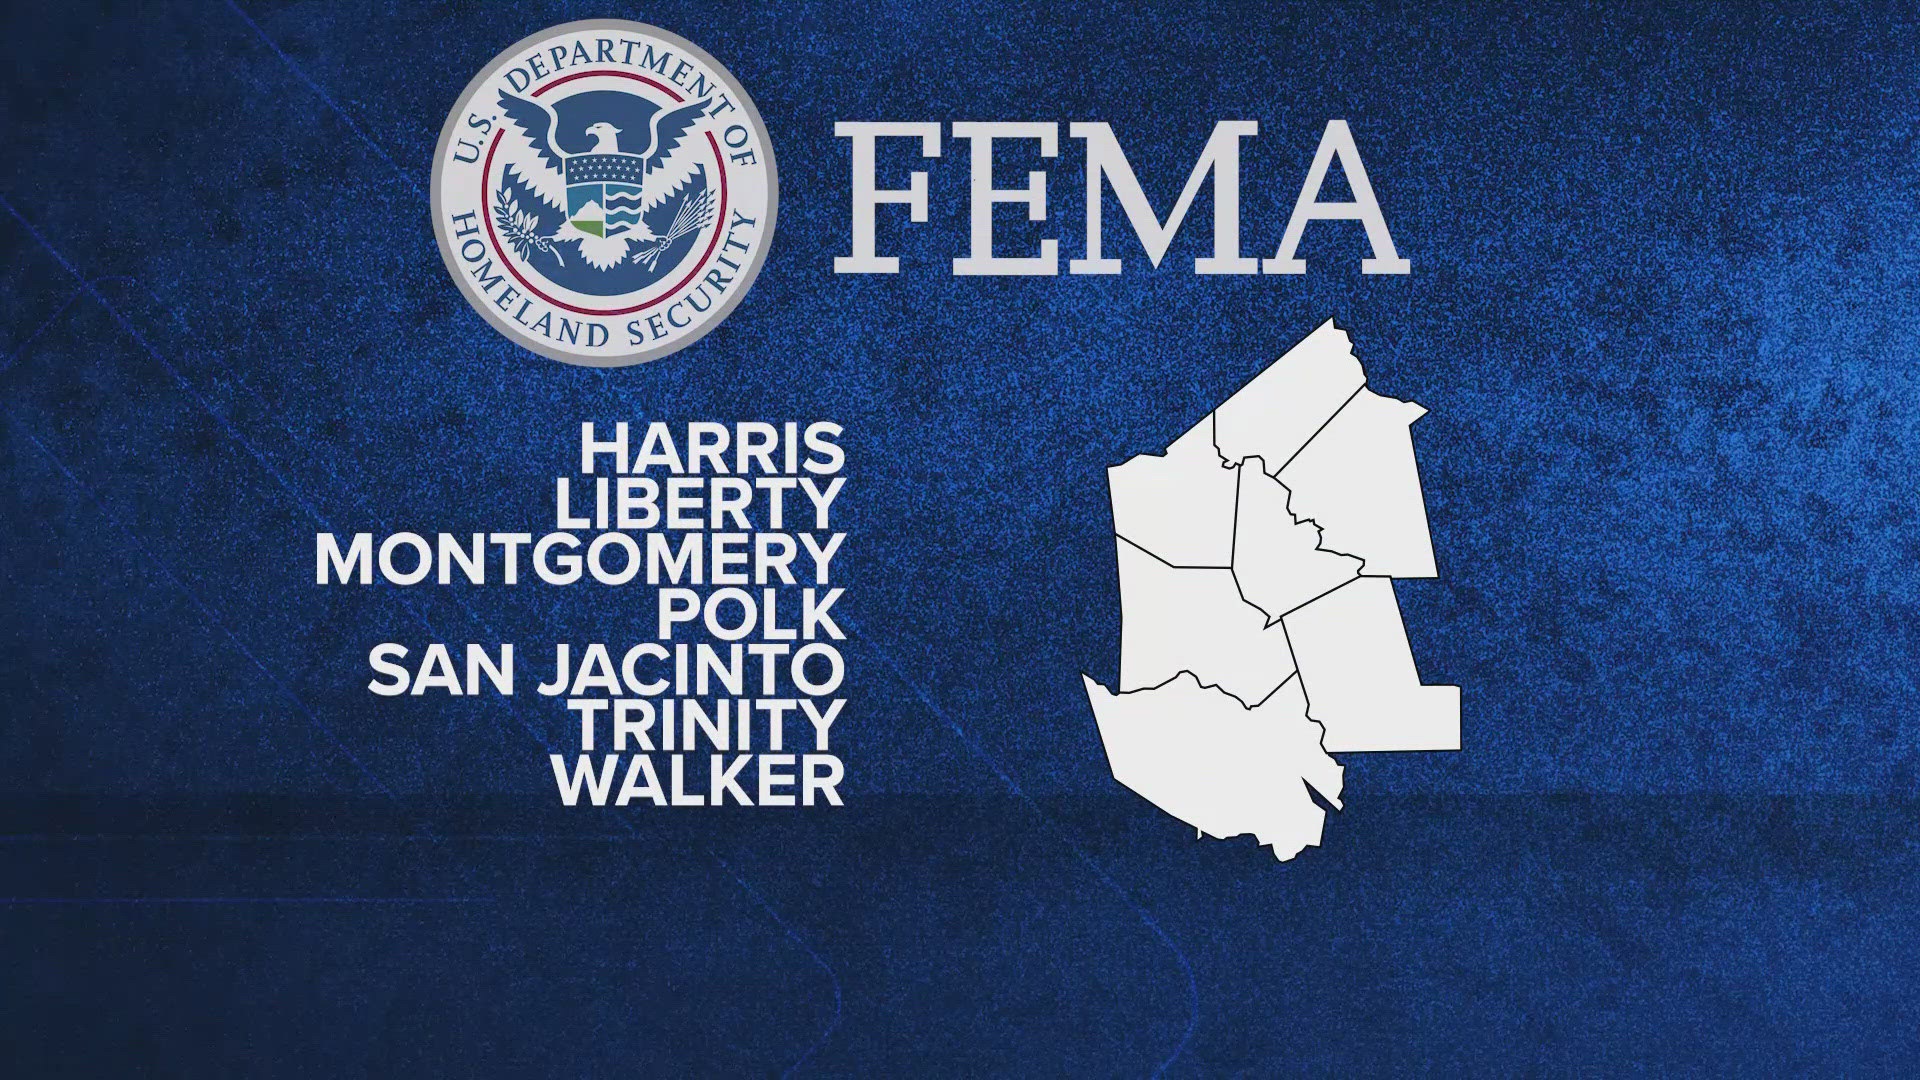 Disaster assistance from FEMA is available for people living in Harris, Liberty, Montgomery, Polk, San Jacinto, Trinity and Walker counties.